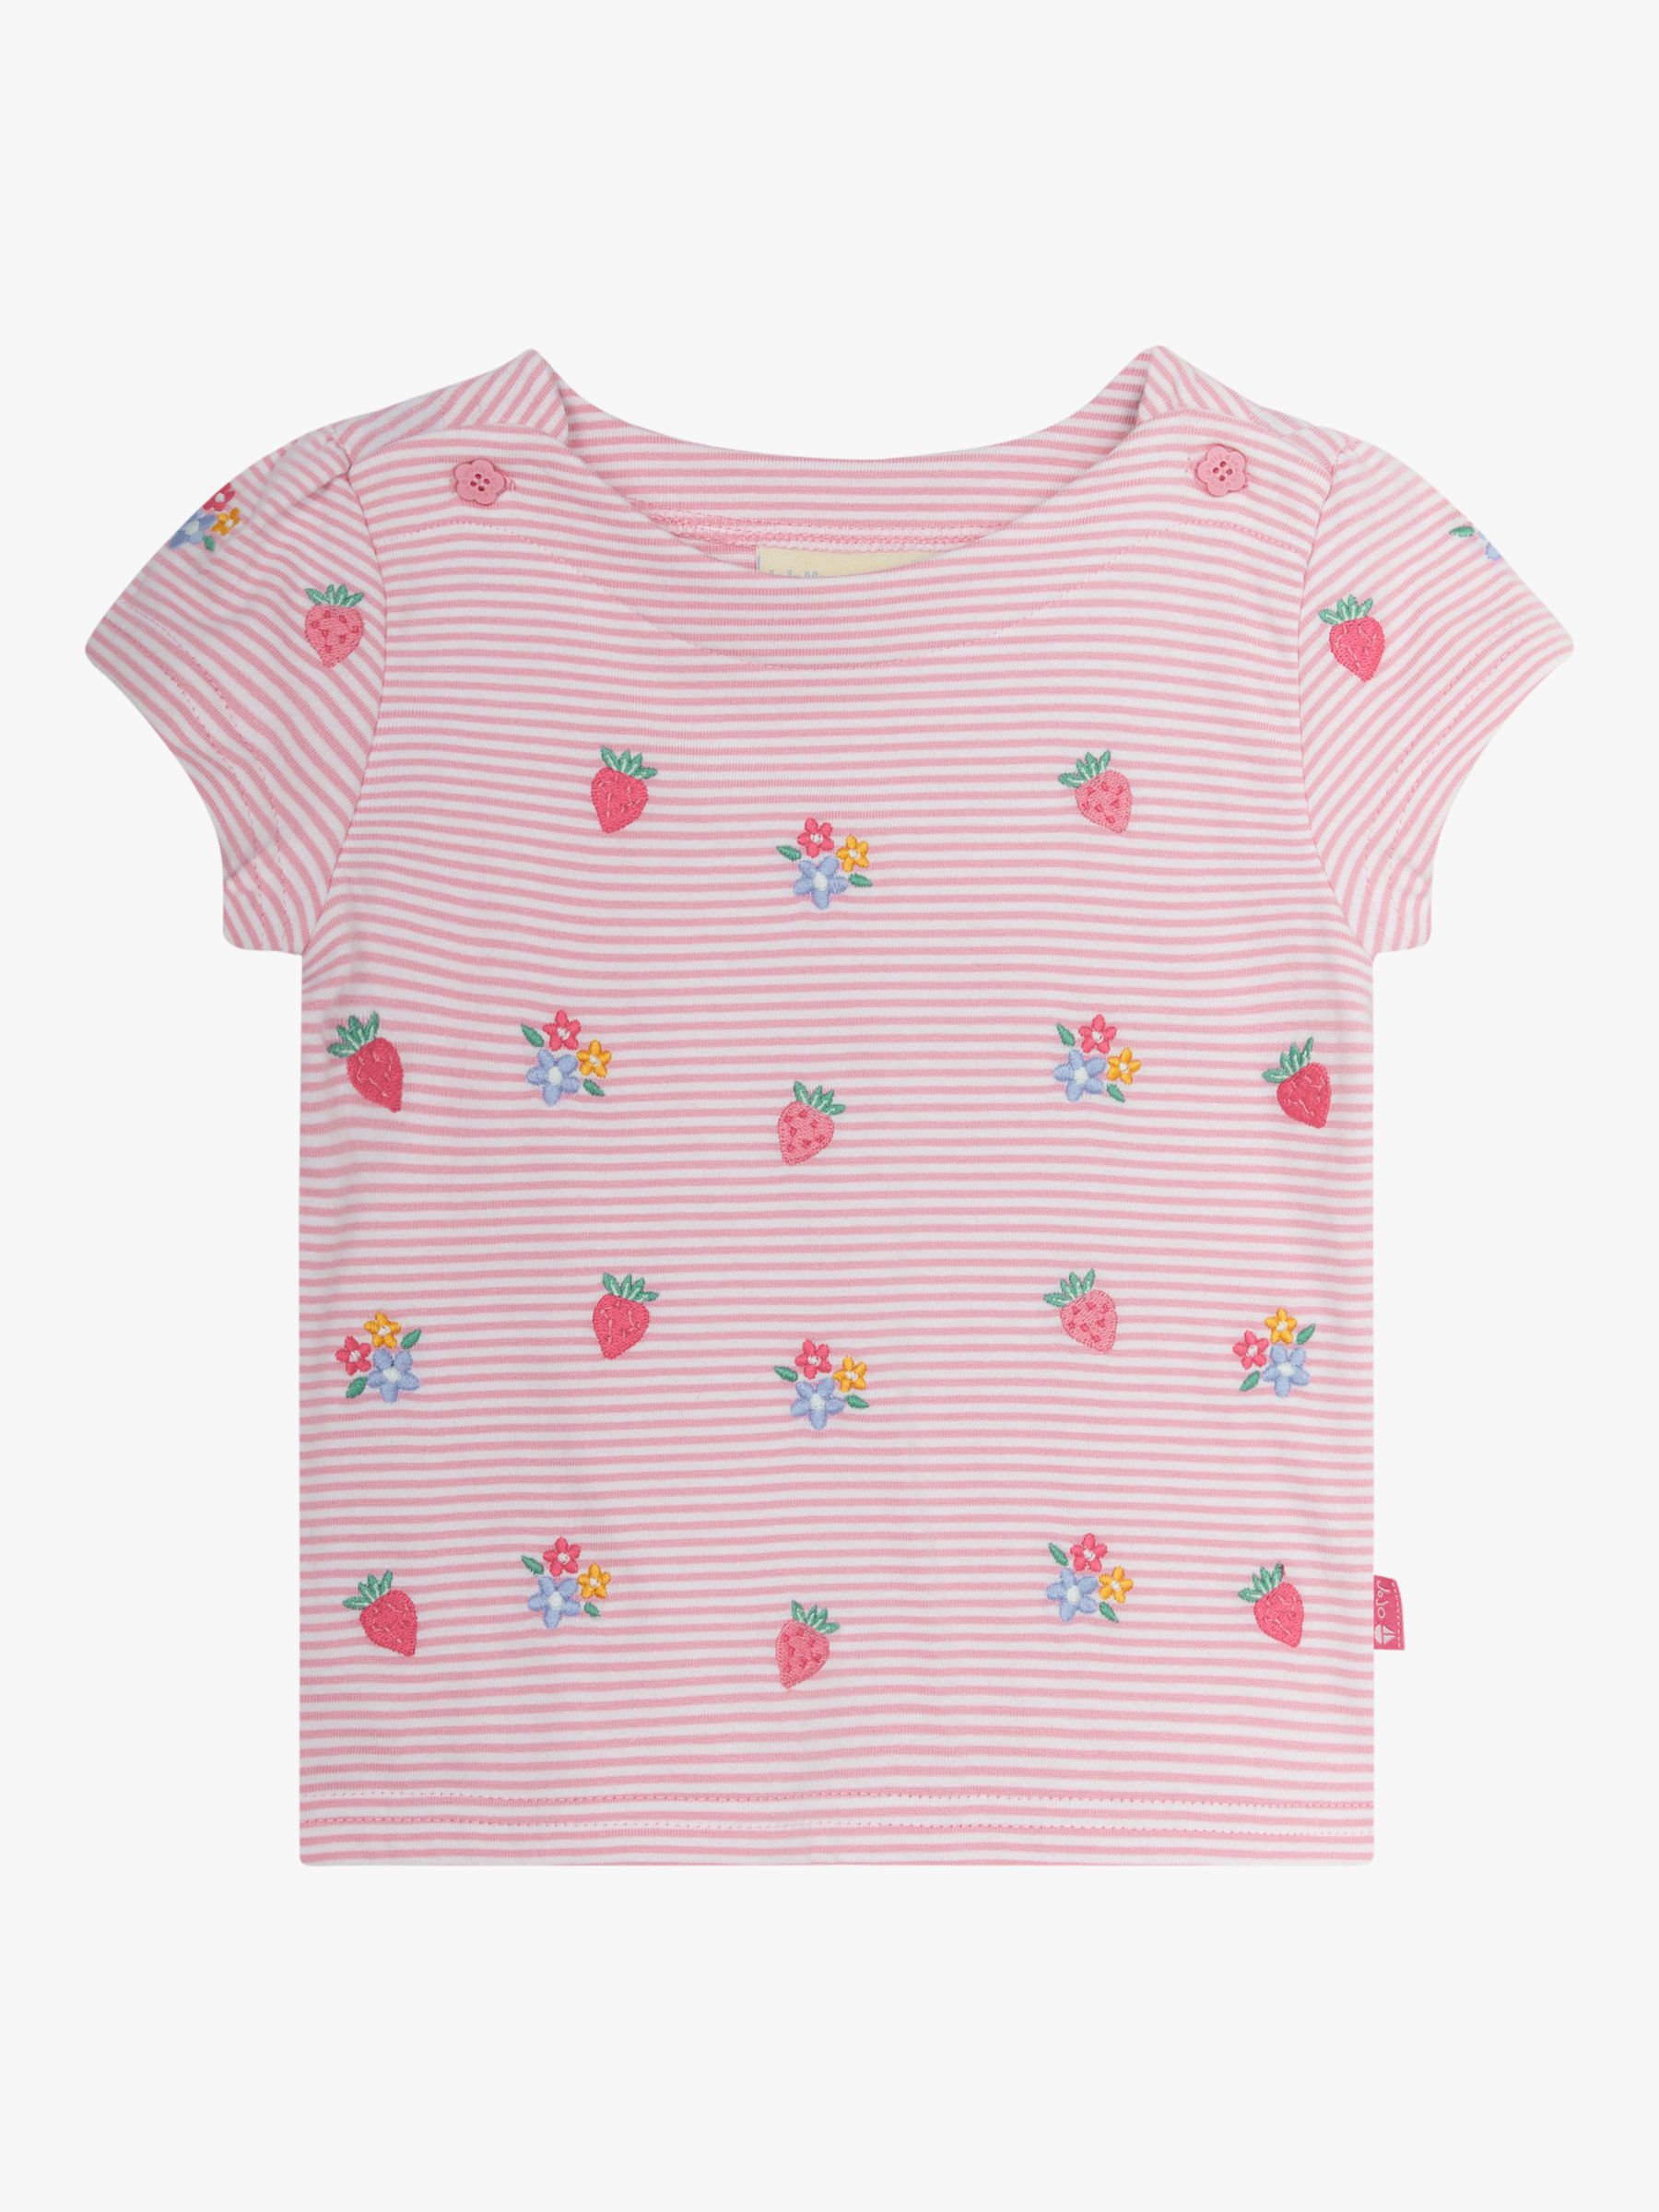 JoJo Maman Bébé Baby Strawberry Floral Embroidered Stripe T-Shirt, Pink/Multi, 2-3 years